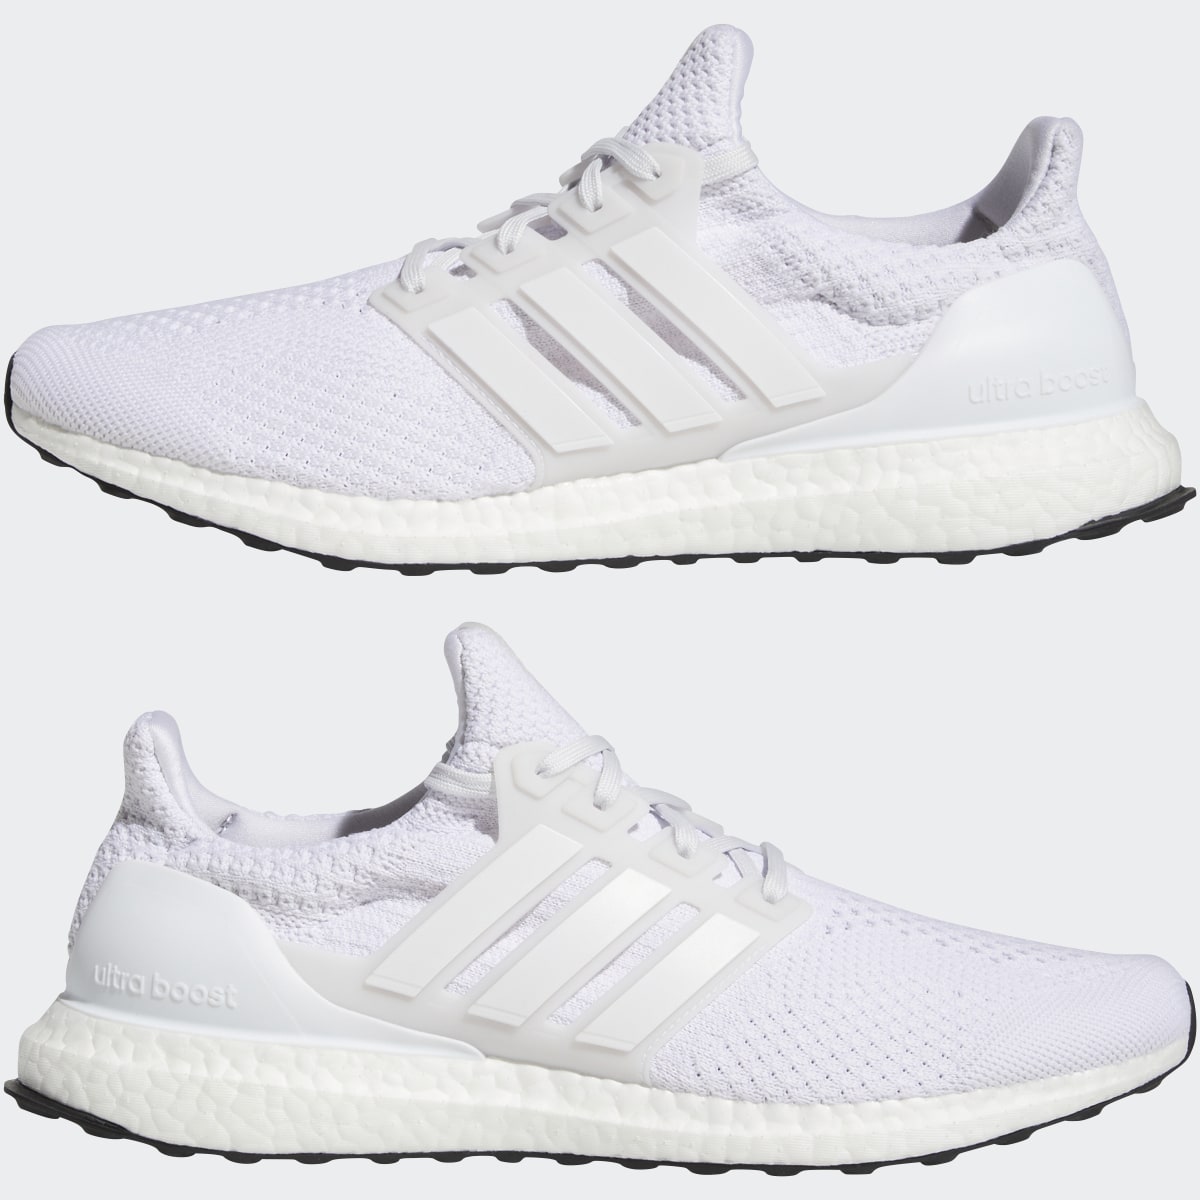 Adidas Ultraboost DNA 5.0 Shoes. 9